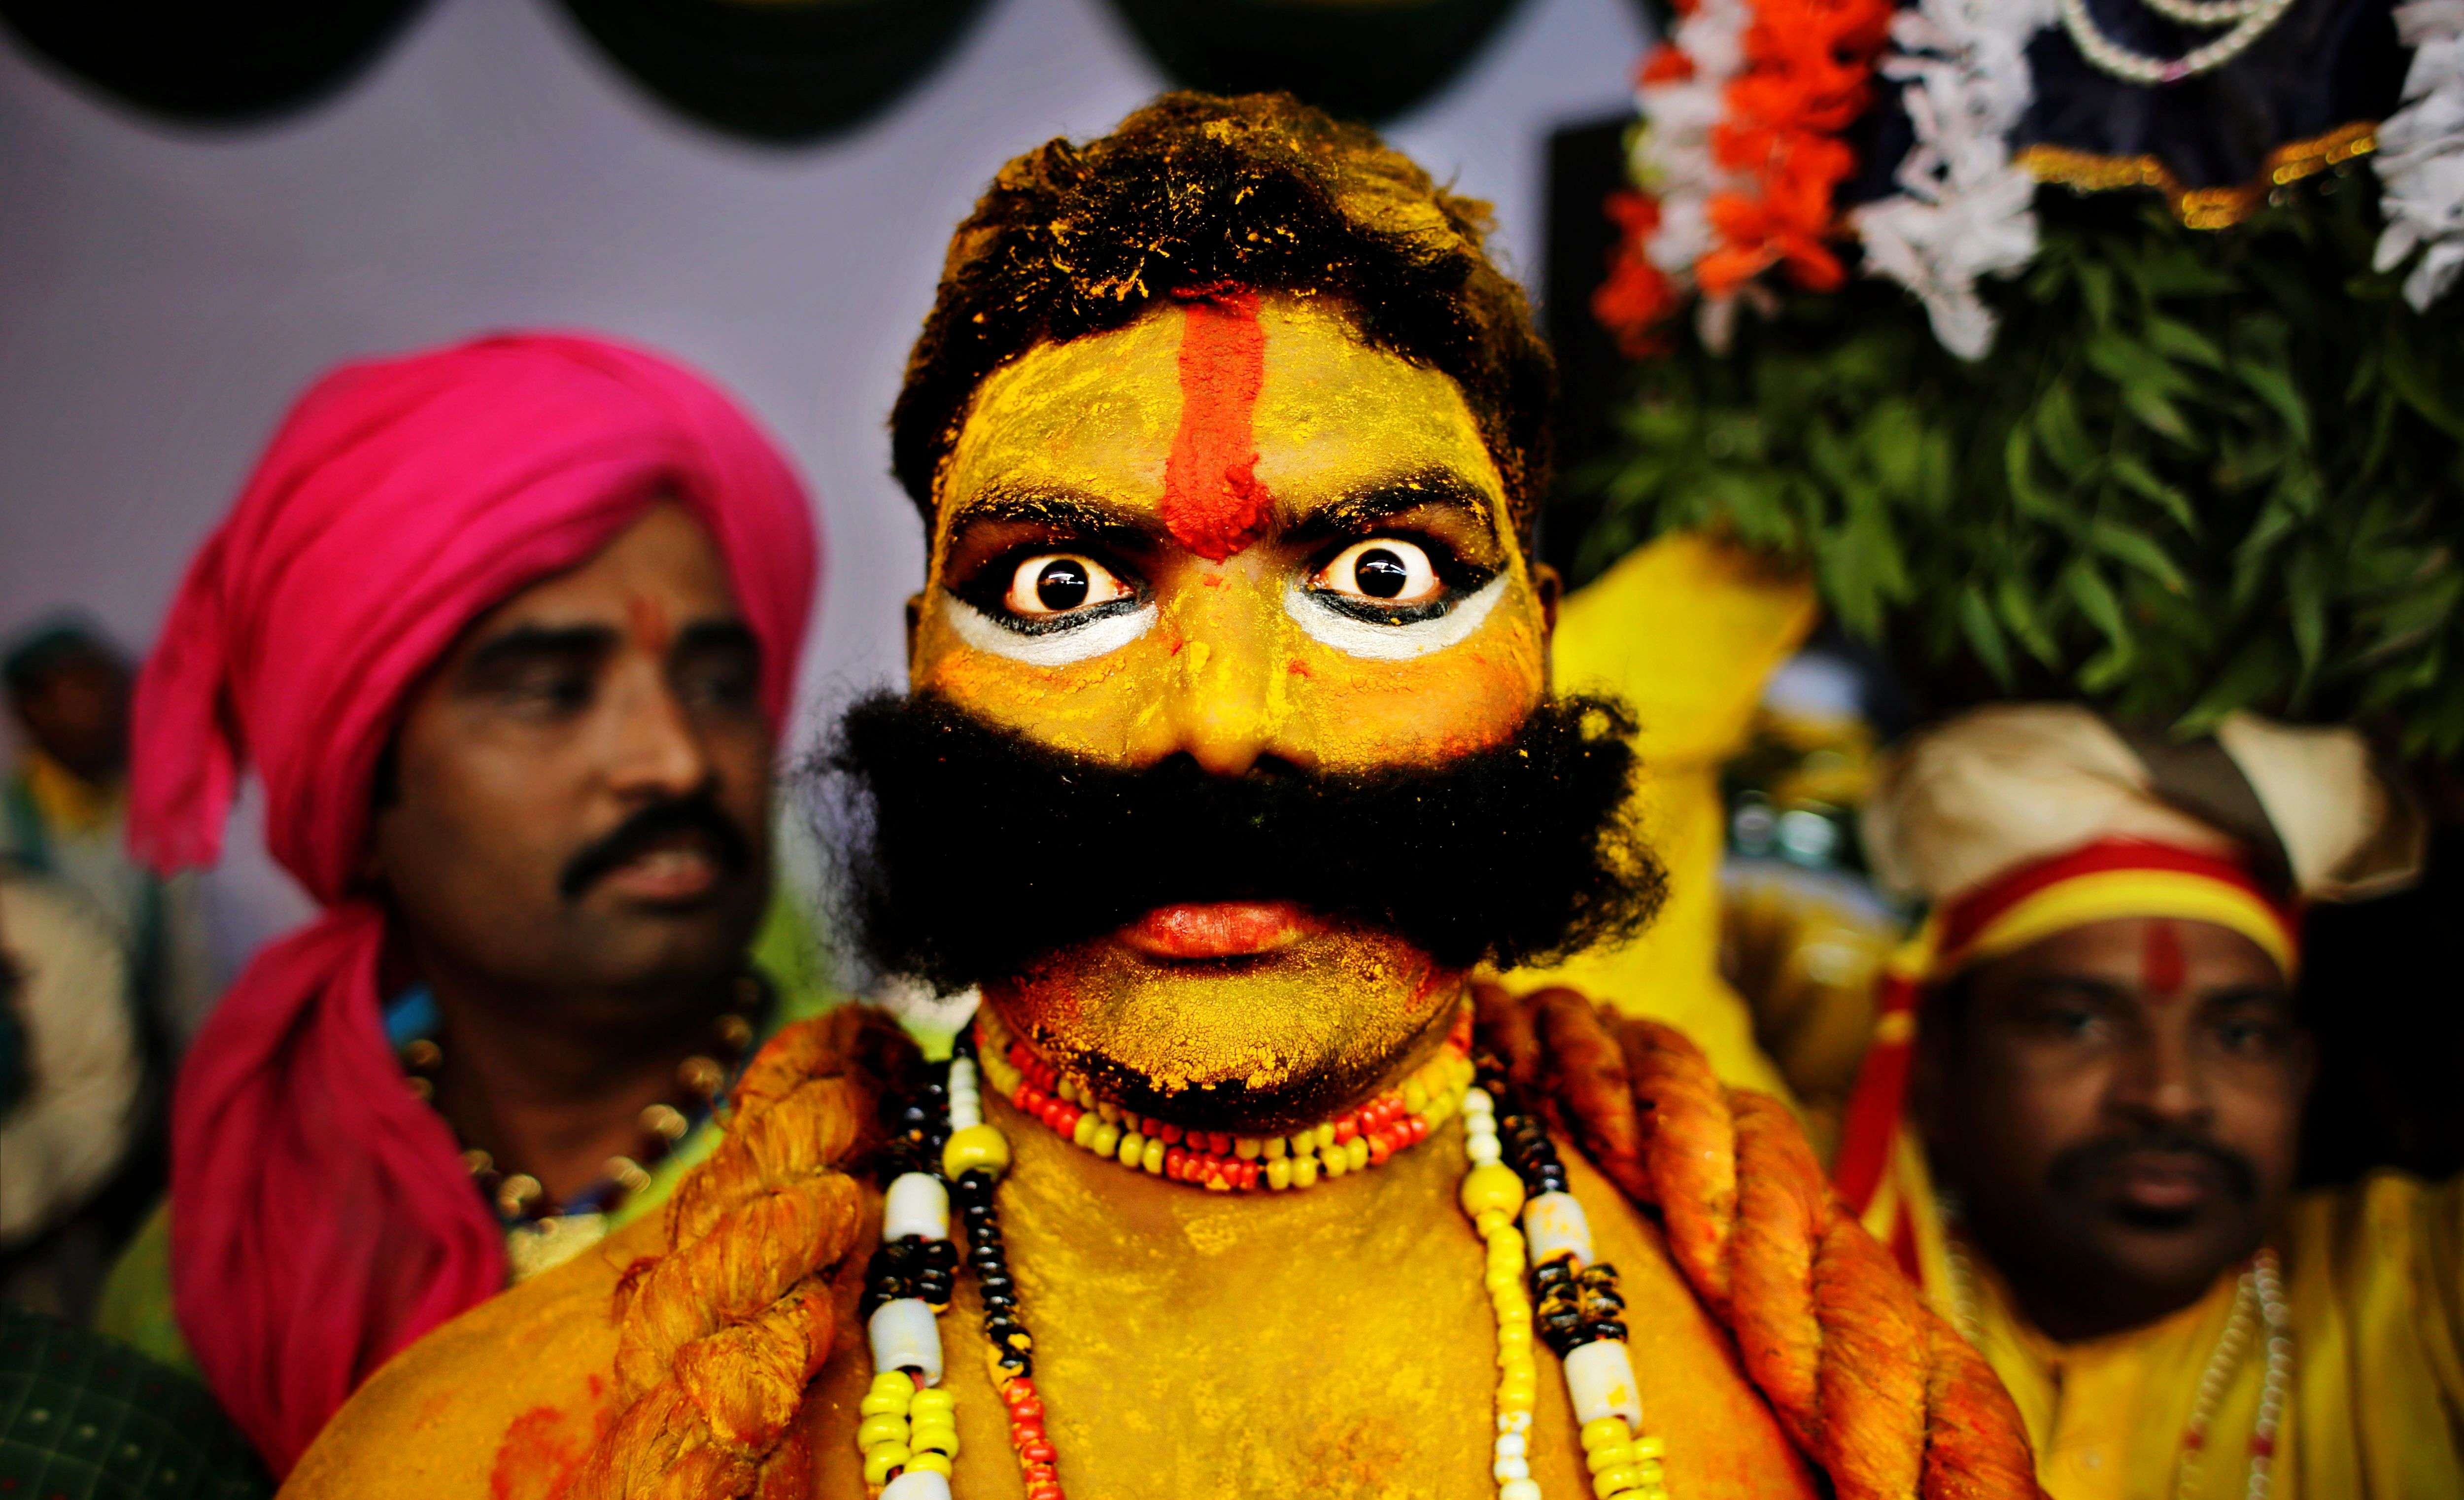 An artist from the state of Telangana reacts to the camera as they wait for their turn to perform during a media preview displaying a glimpse of culture of different parts of India, in New Delhi. (AP Photo/Altaf Qadri)